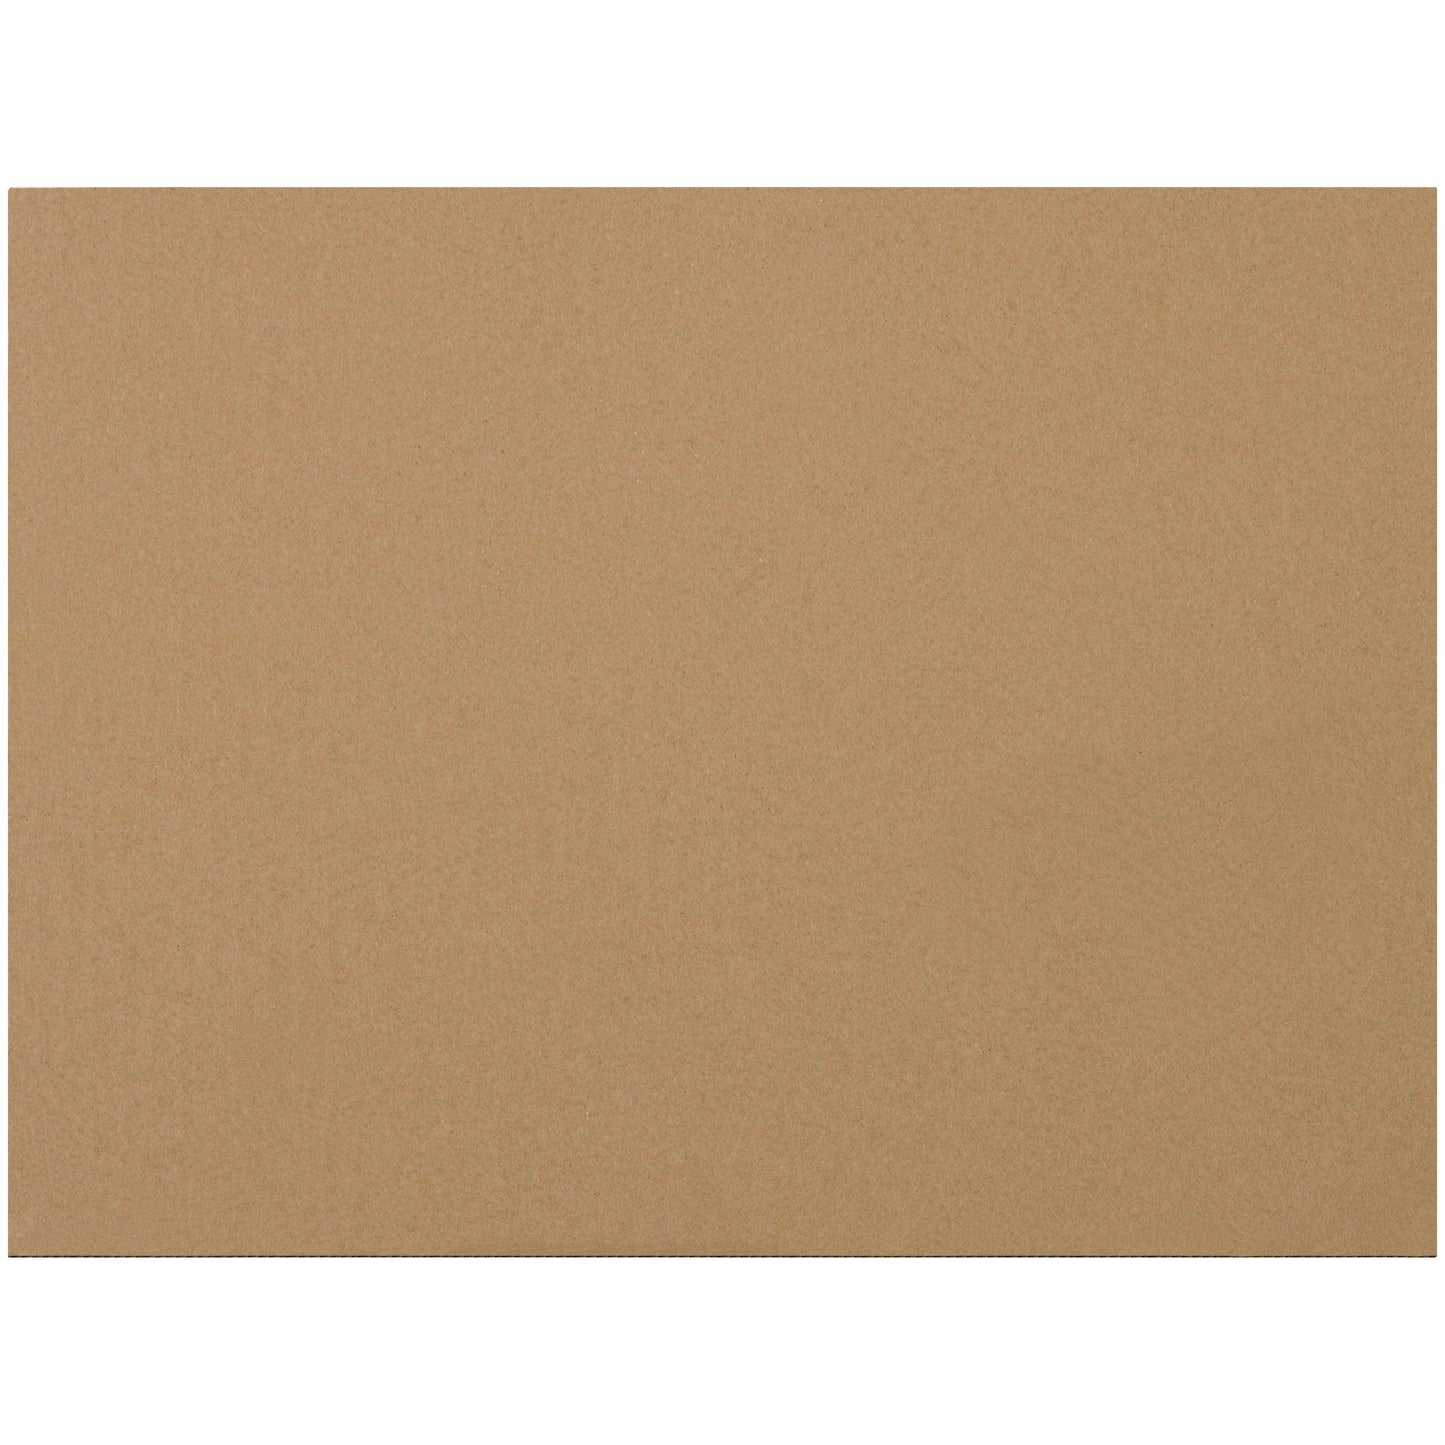 11 7/8 x 15 7/8" Corrugated Layer Pads - SP1115